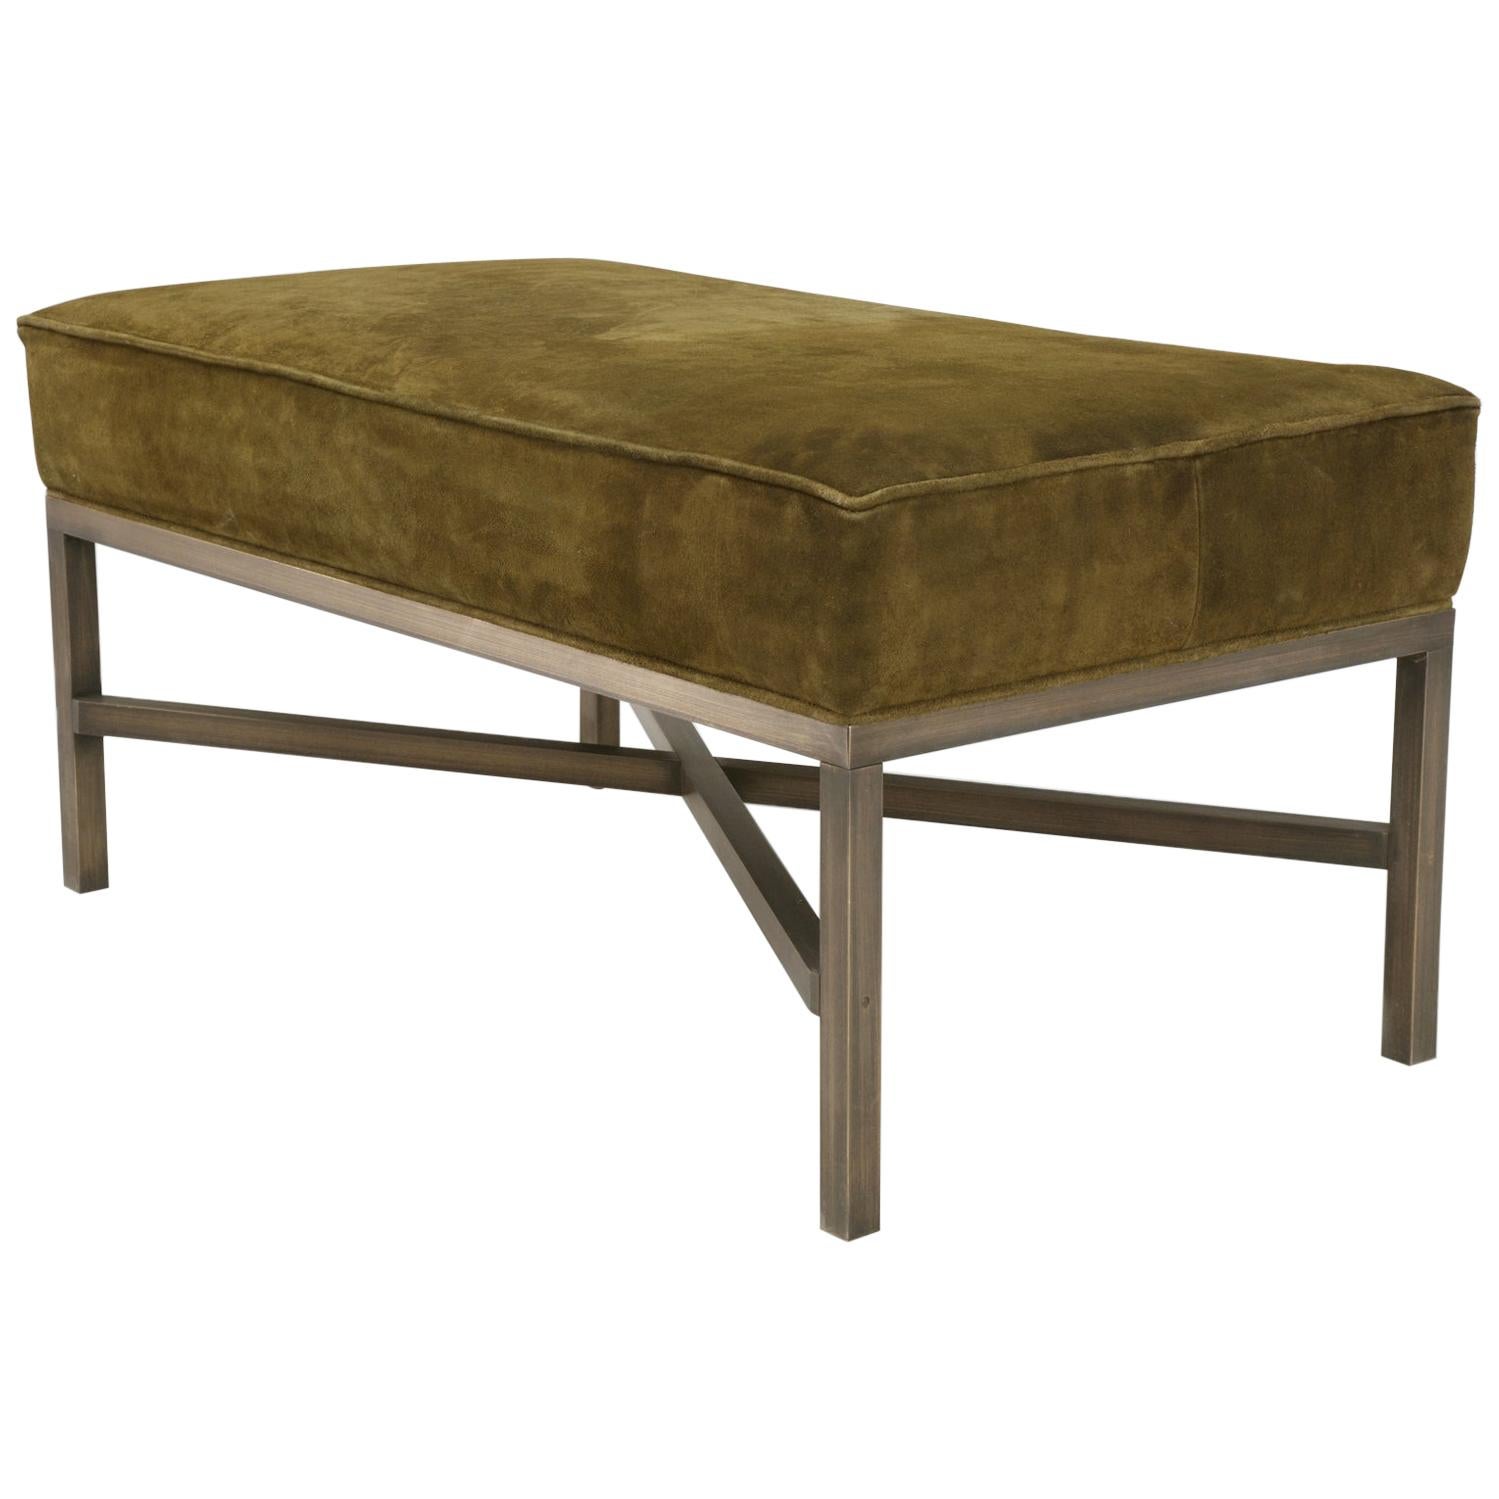 Custom Handmade Bronze Upholstered Bench or Ottoman in Any Dimension or Finish